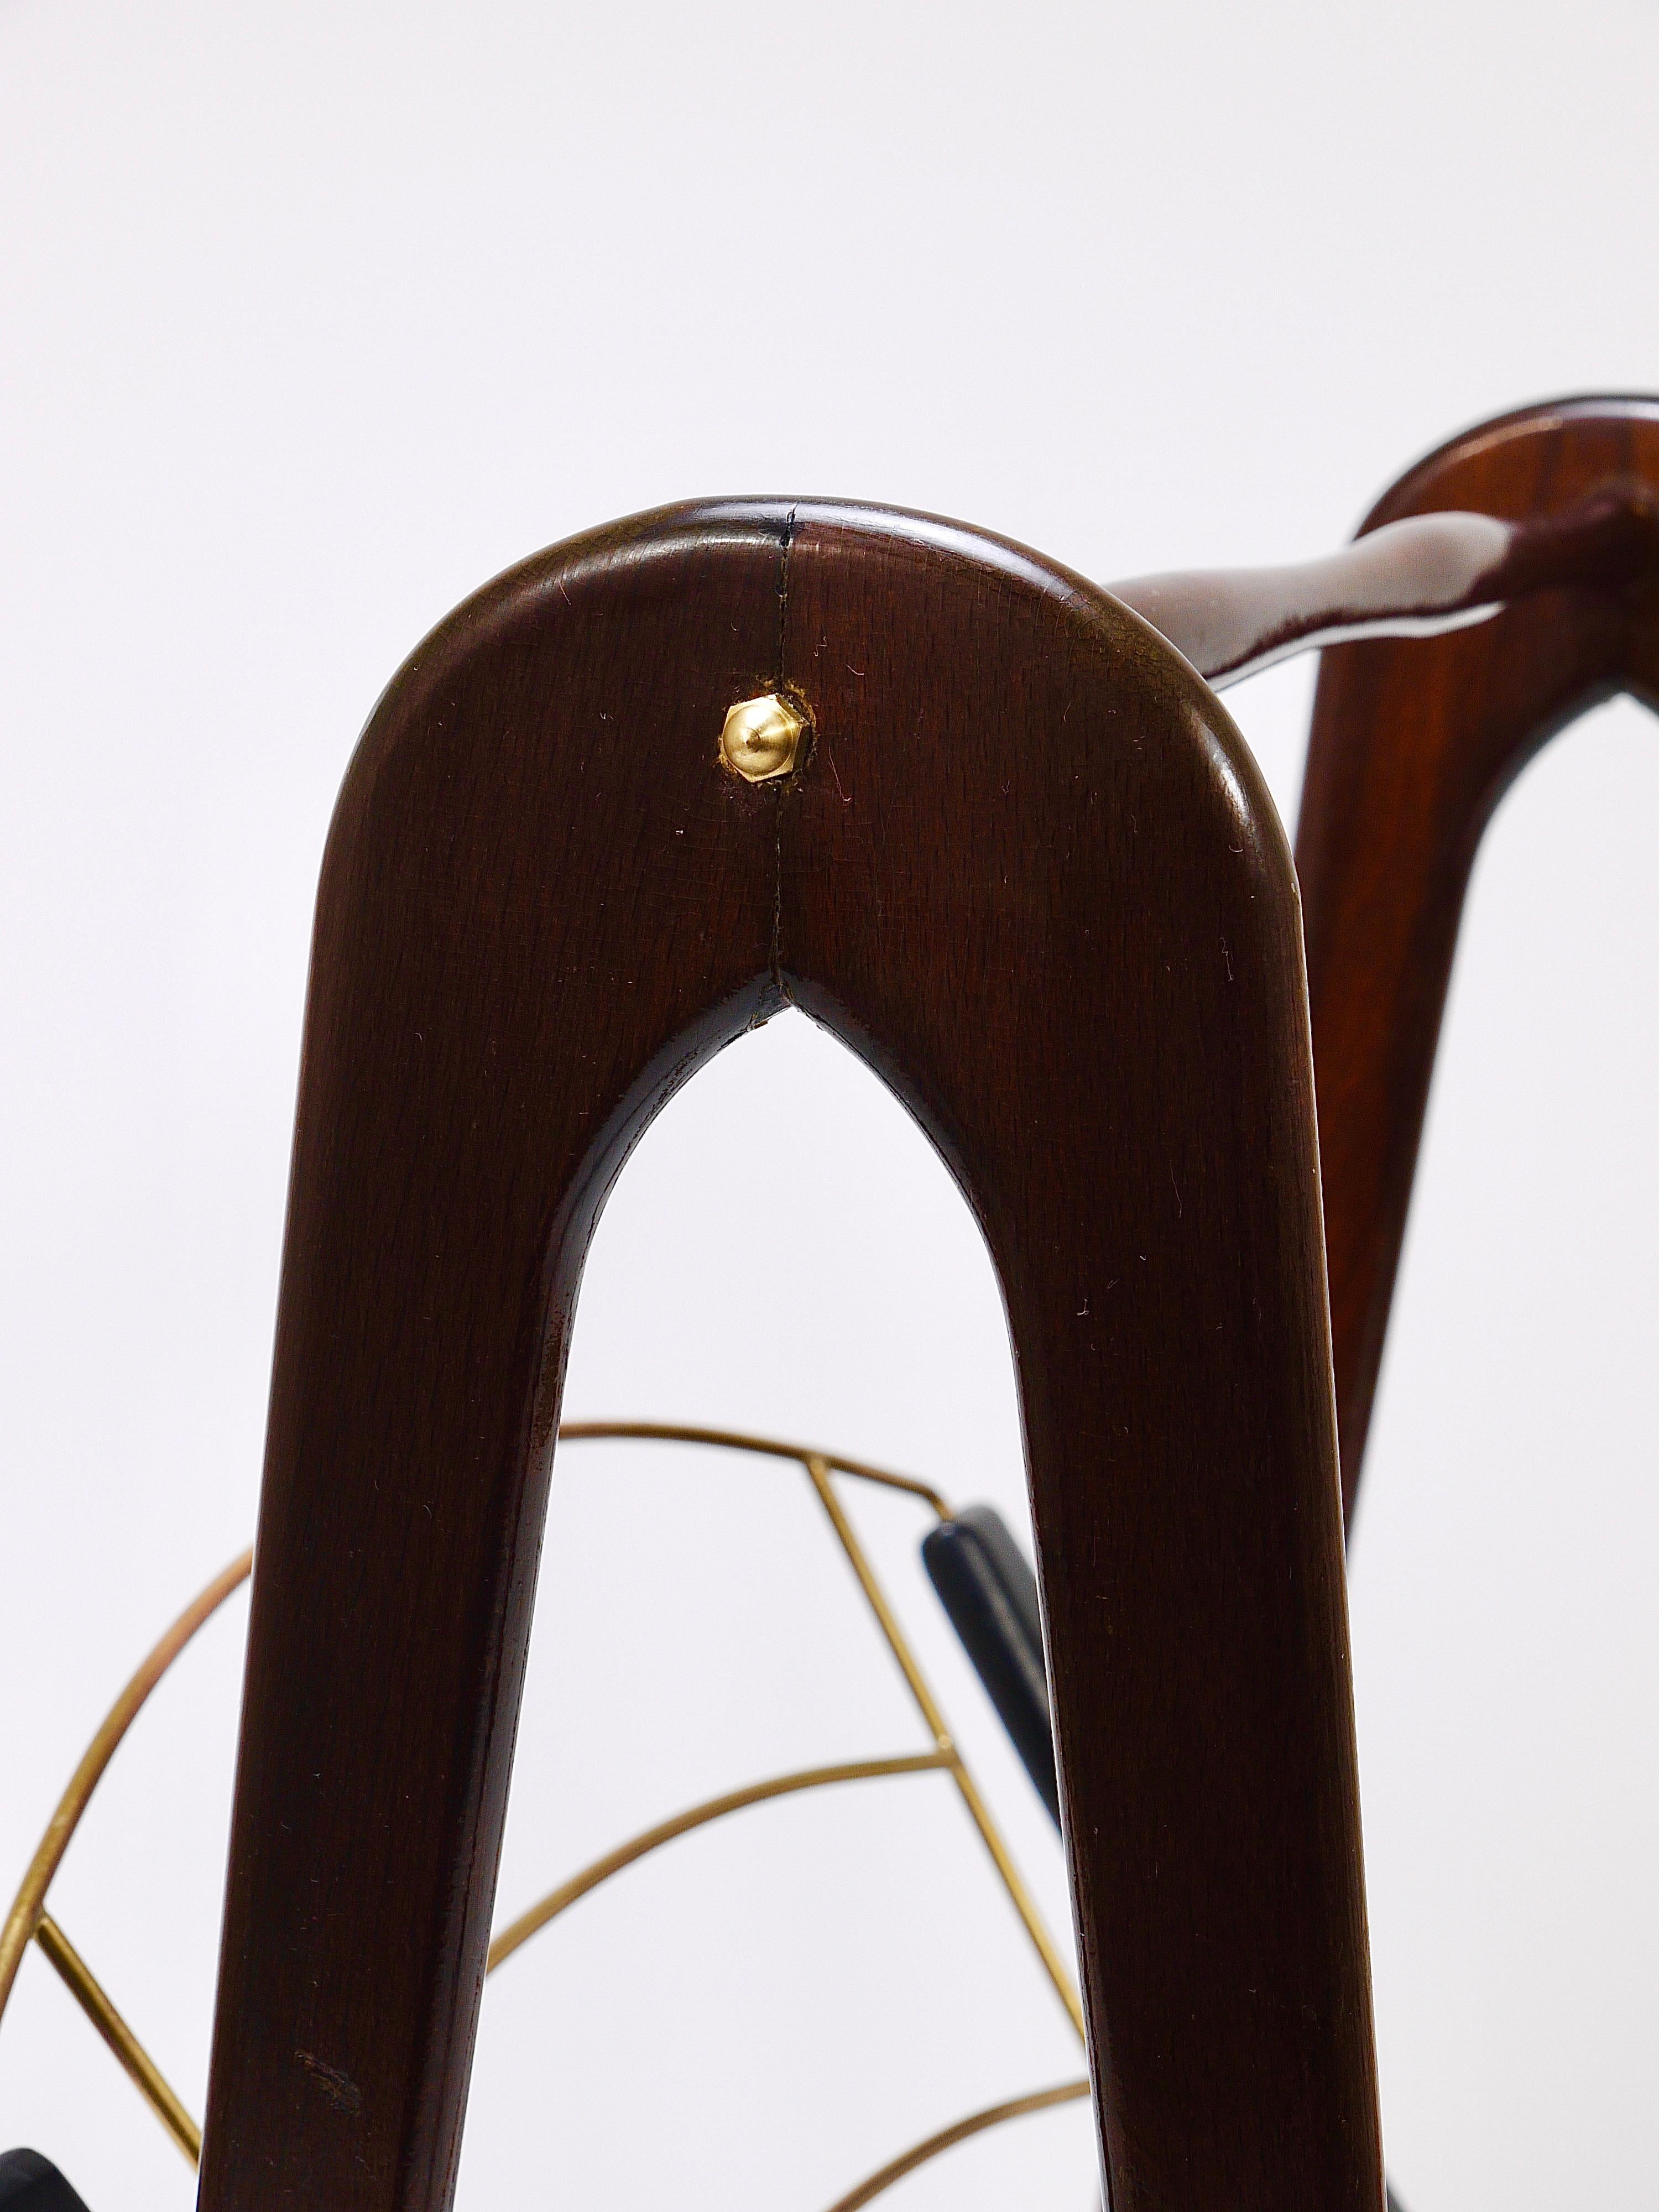 Cesare Lacca Midcentury Magazine Rack, Mahogany & Brass, Italy, 1950s For Sale 7